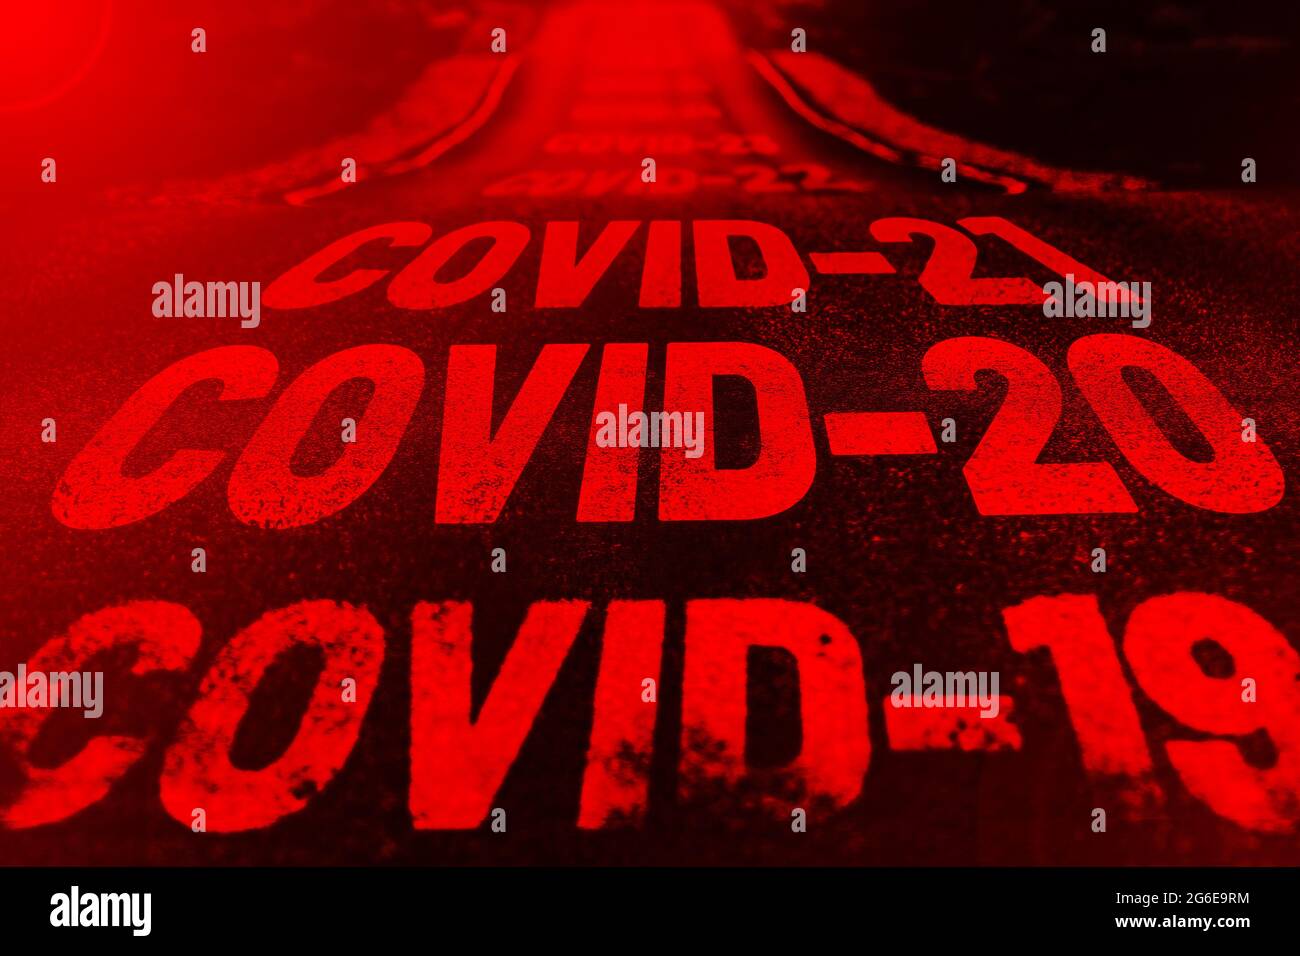 Deserted highway with the text COVID-19, COVID-20, COVID-21 and so on. The concept of new world pandemics. Red background Stock Photo